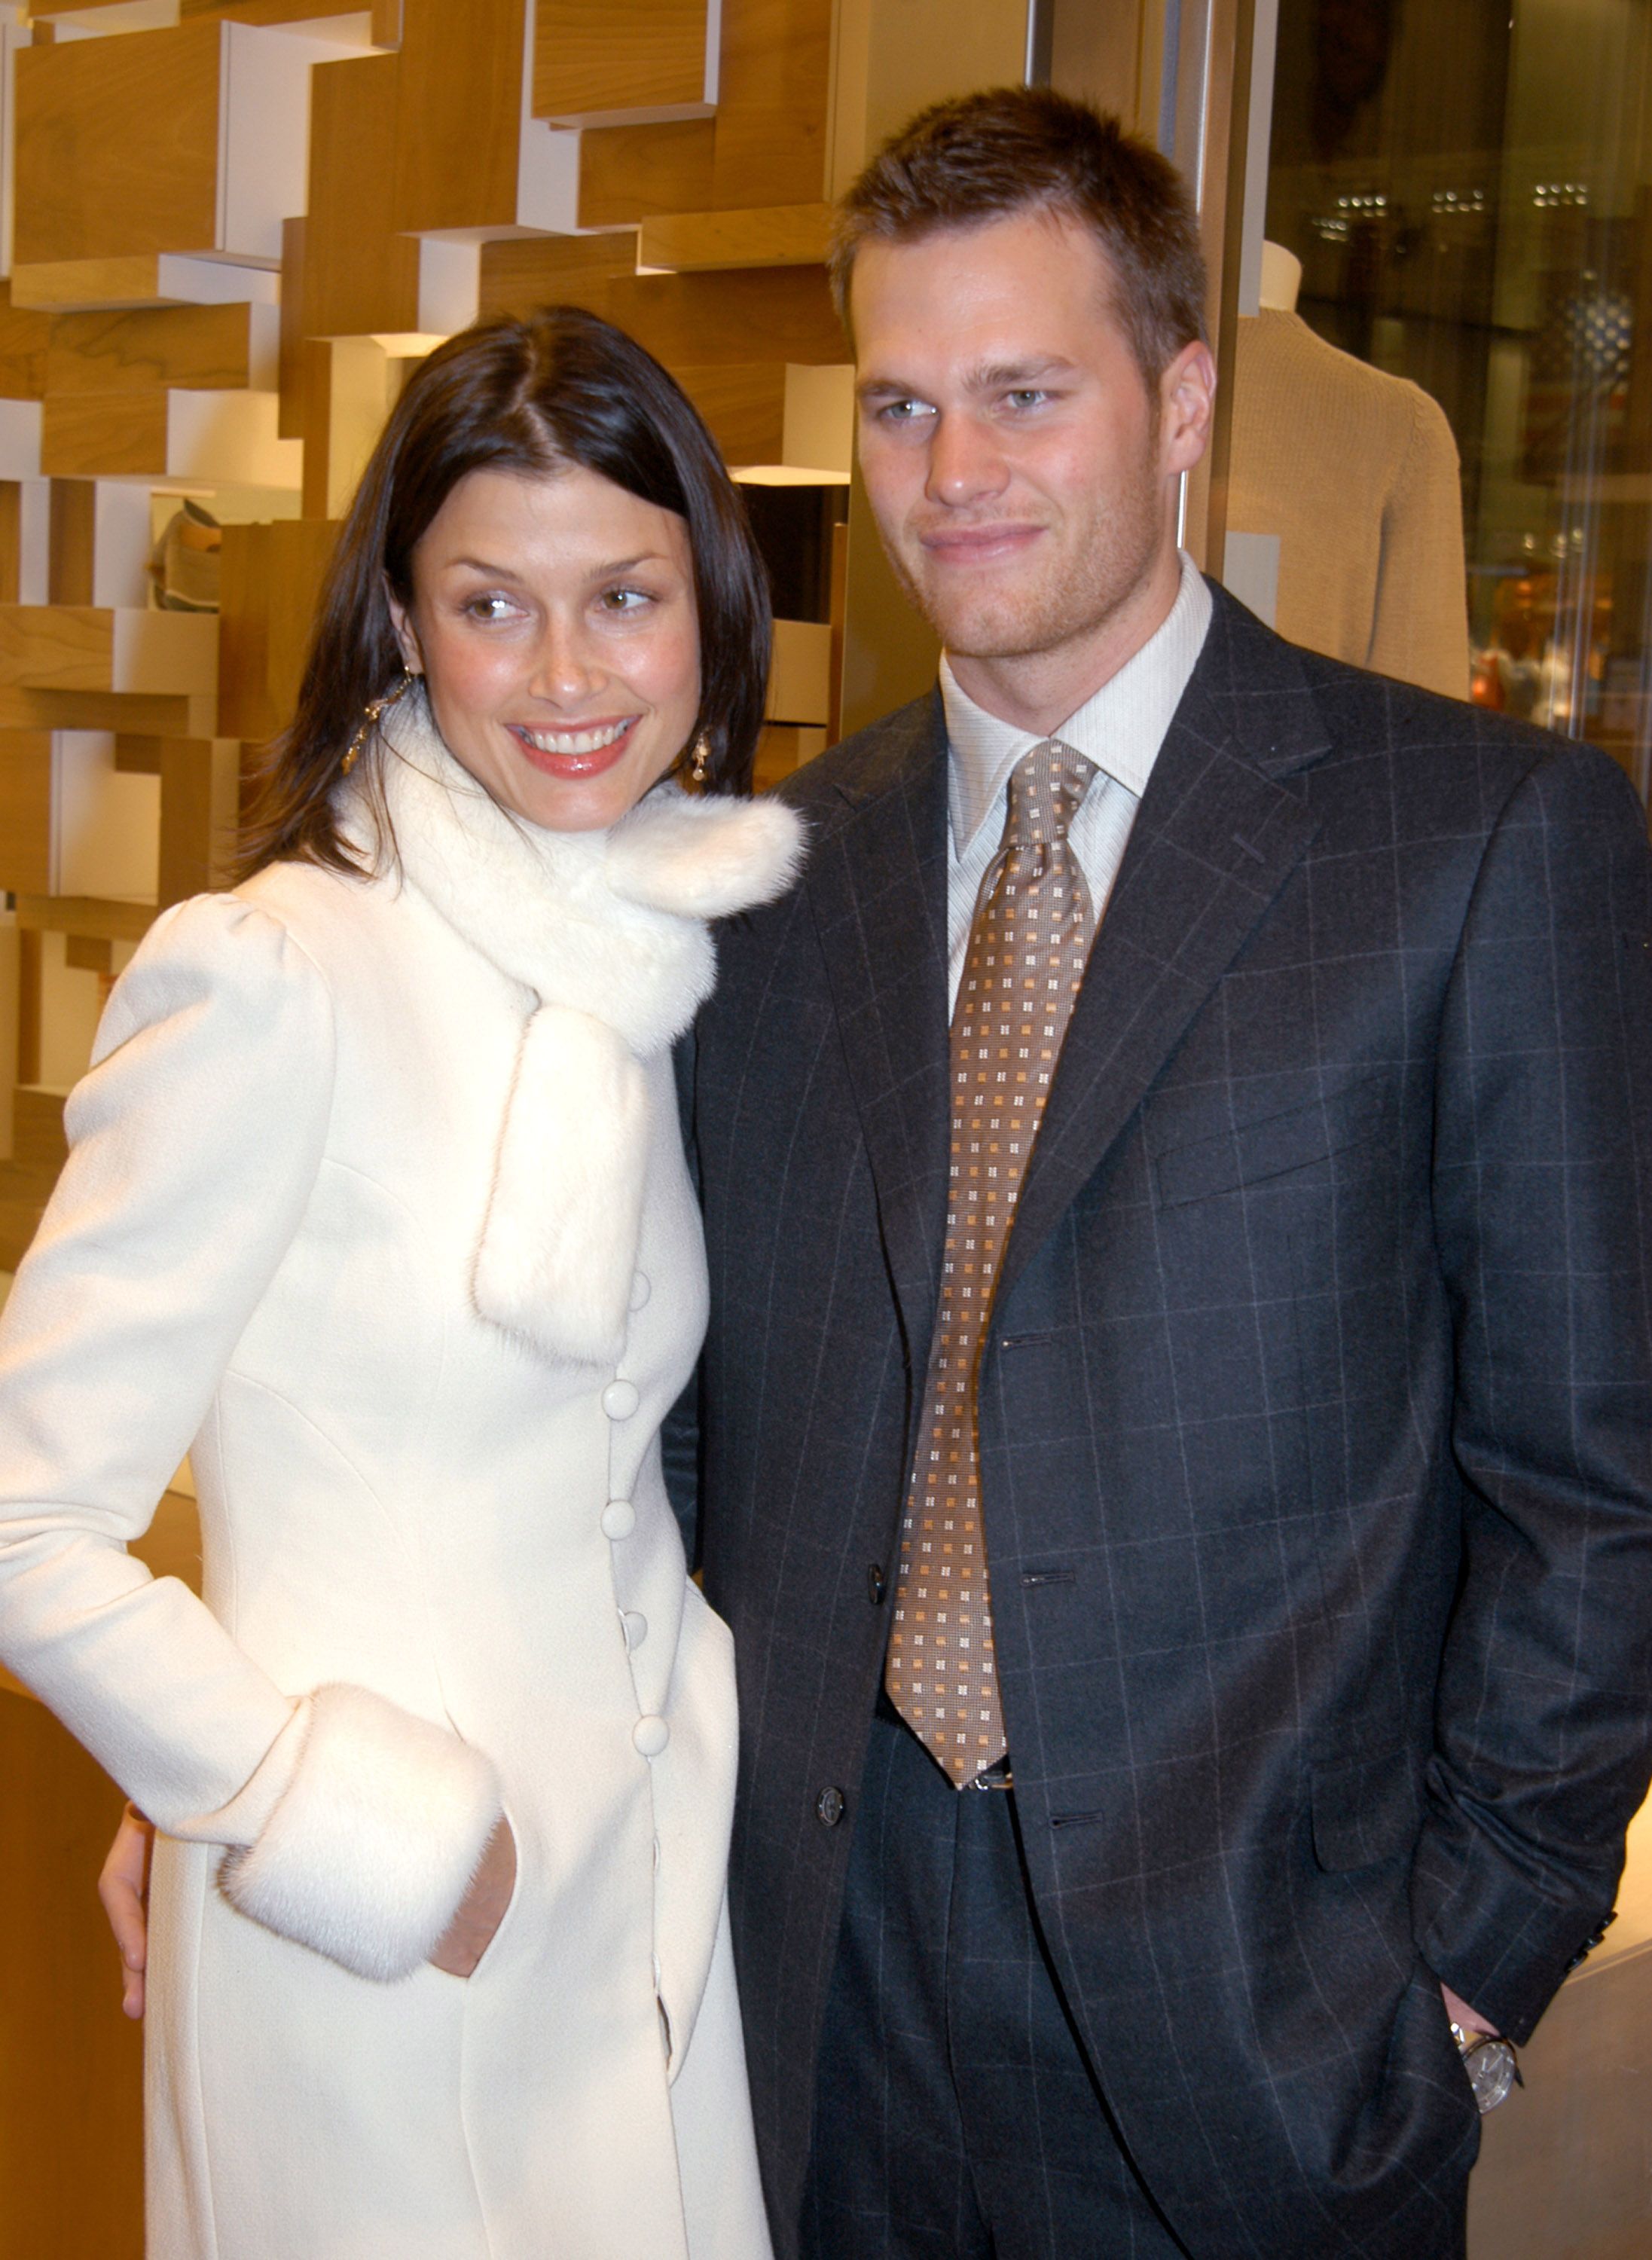 Tom Brady's dating history: His girlfriends before Gisele